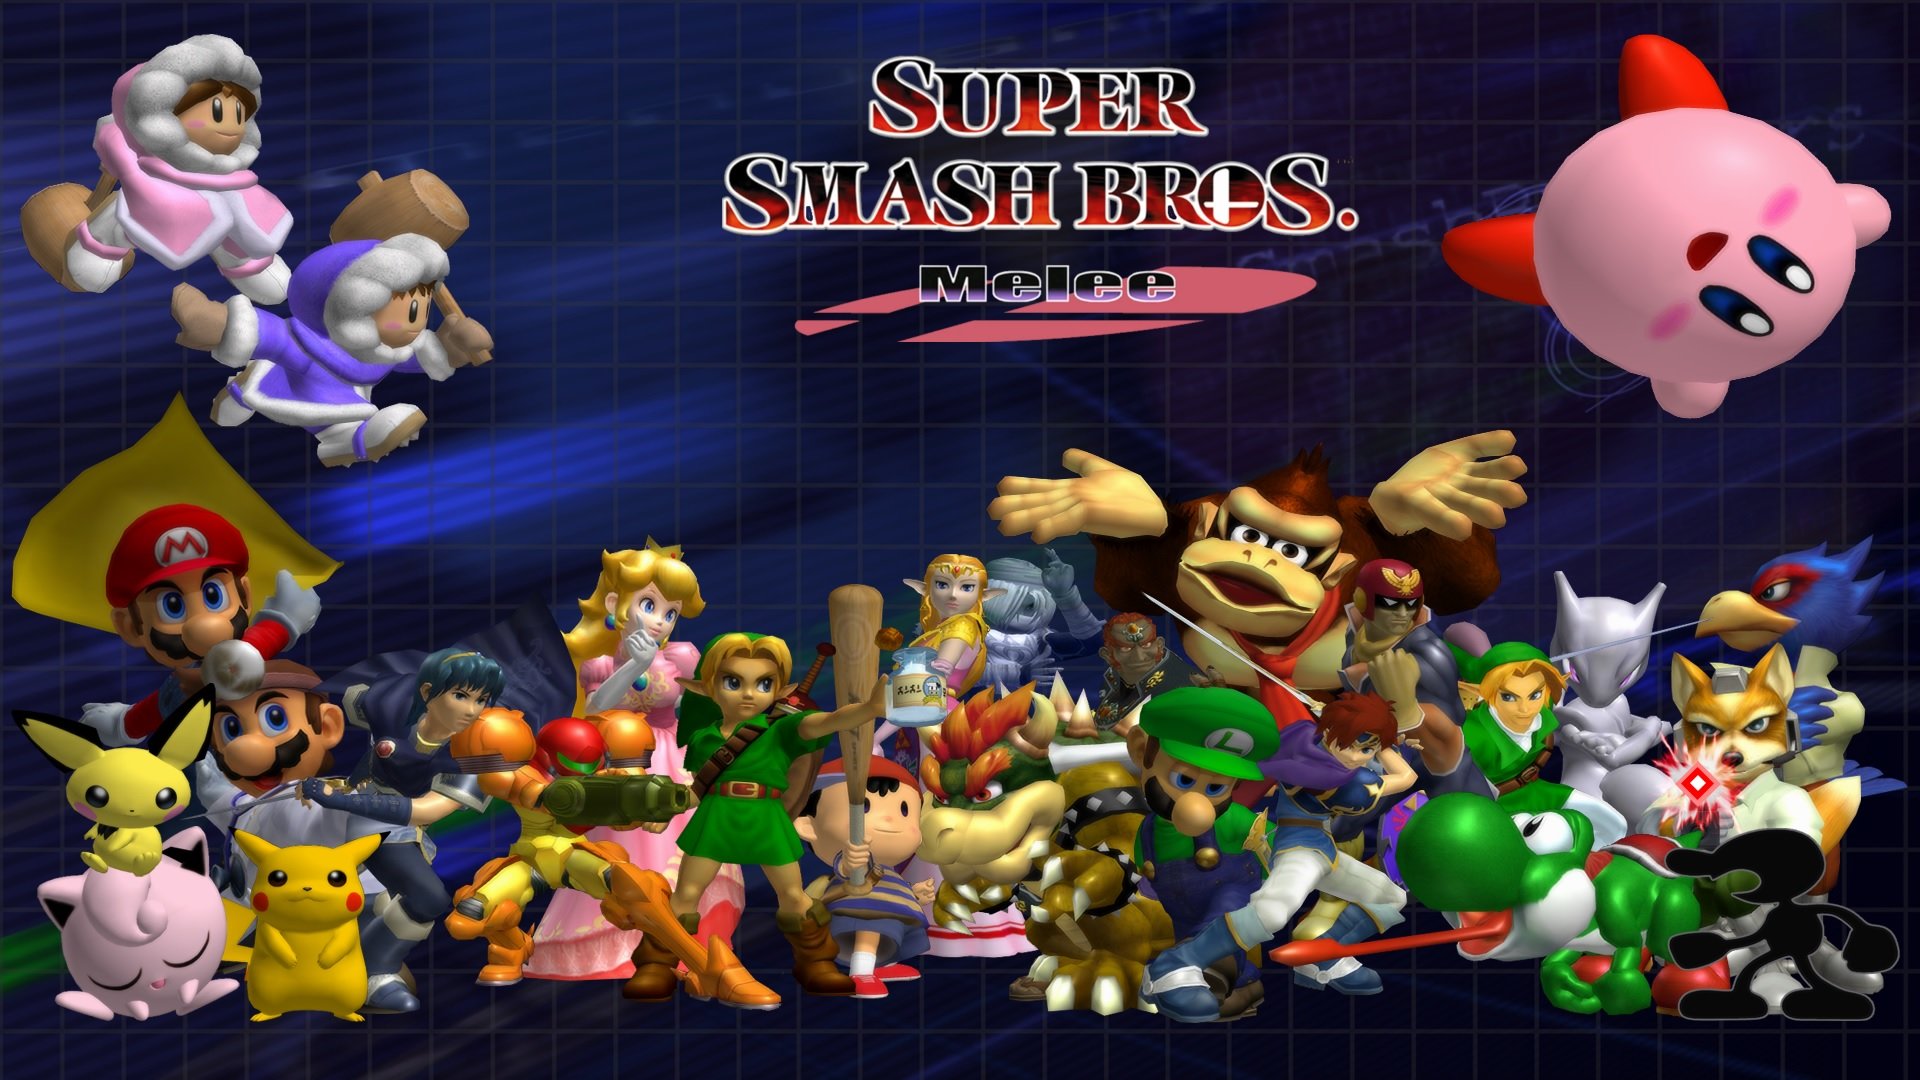 Download hd 1920x1080 Super Smash Bros. Melee computer background ID:61429 for free